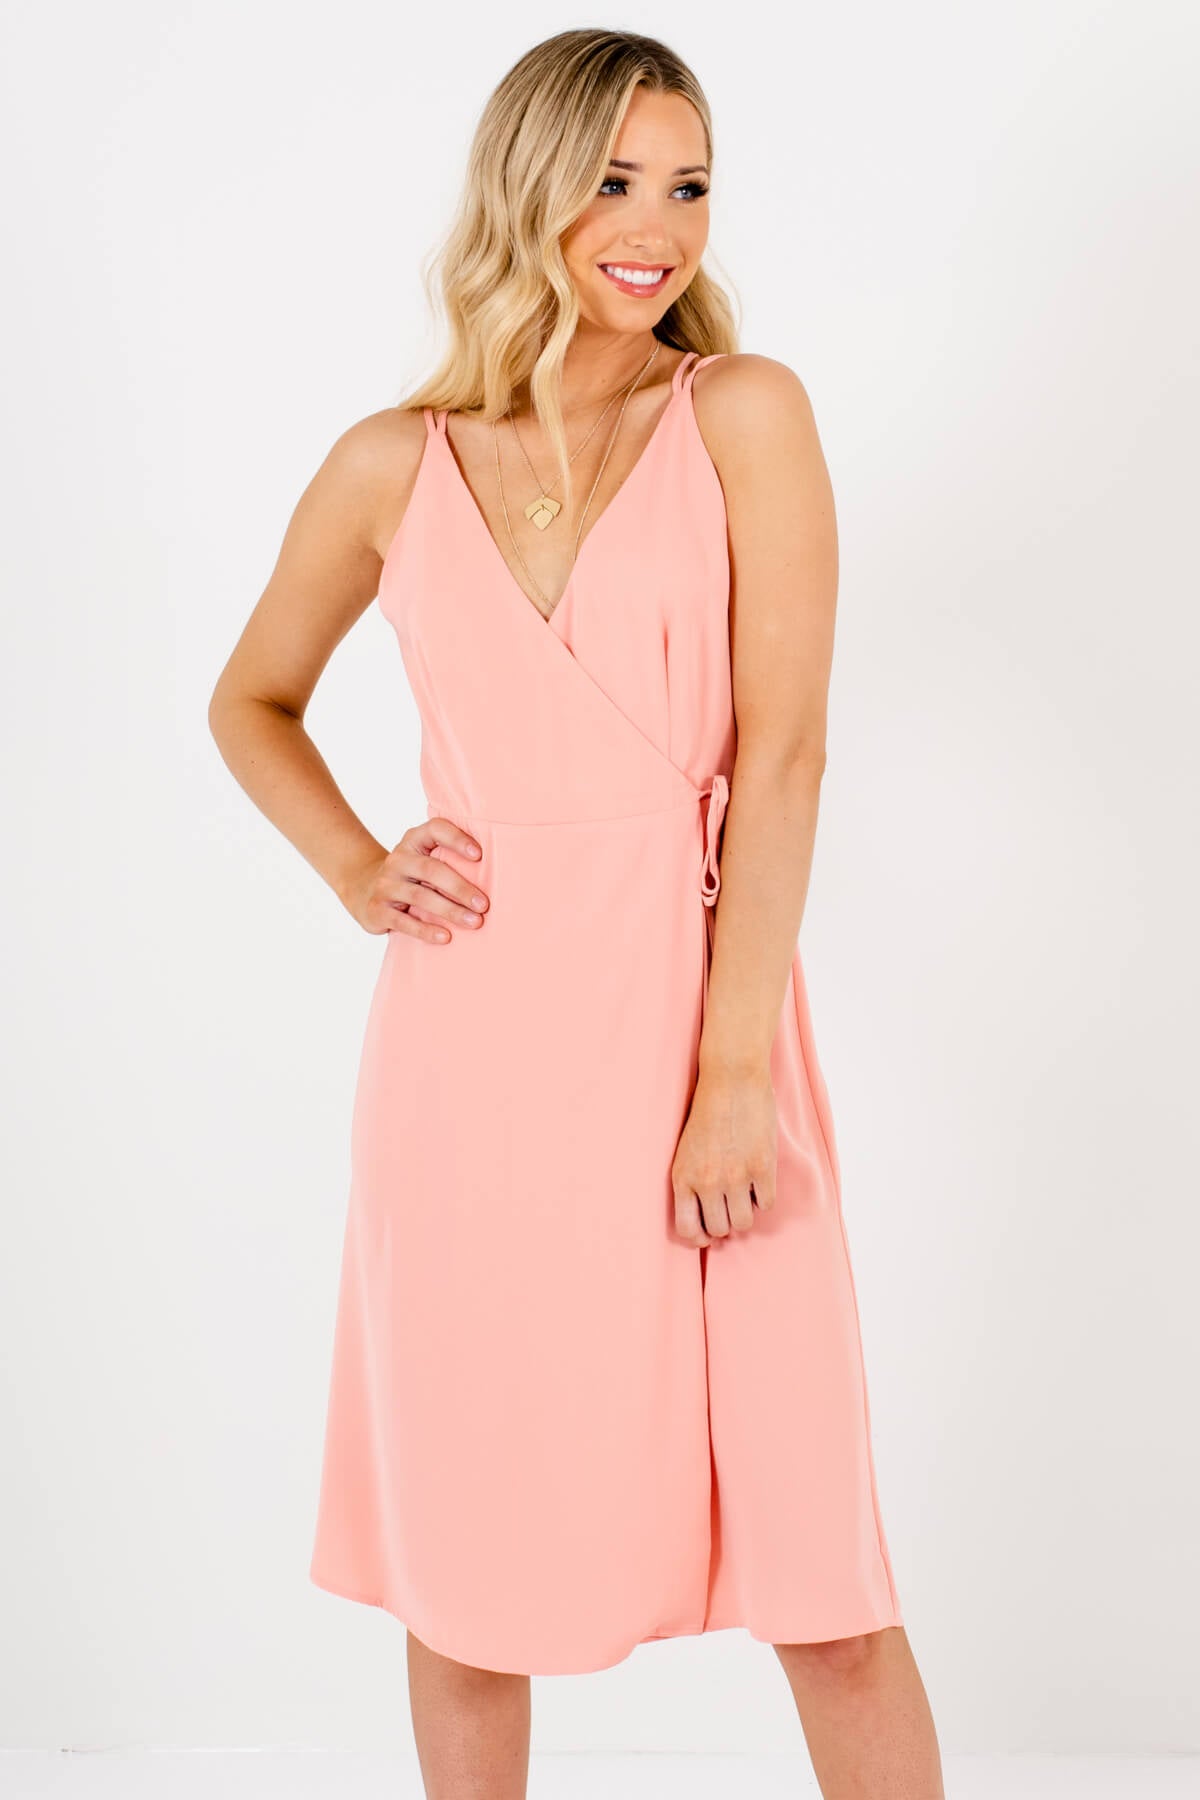 Pink Wrap Style Boutique Knee-Length Dresses for Women